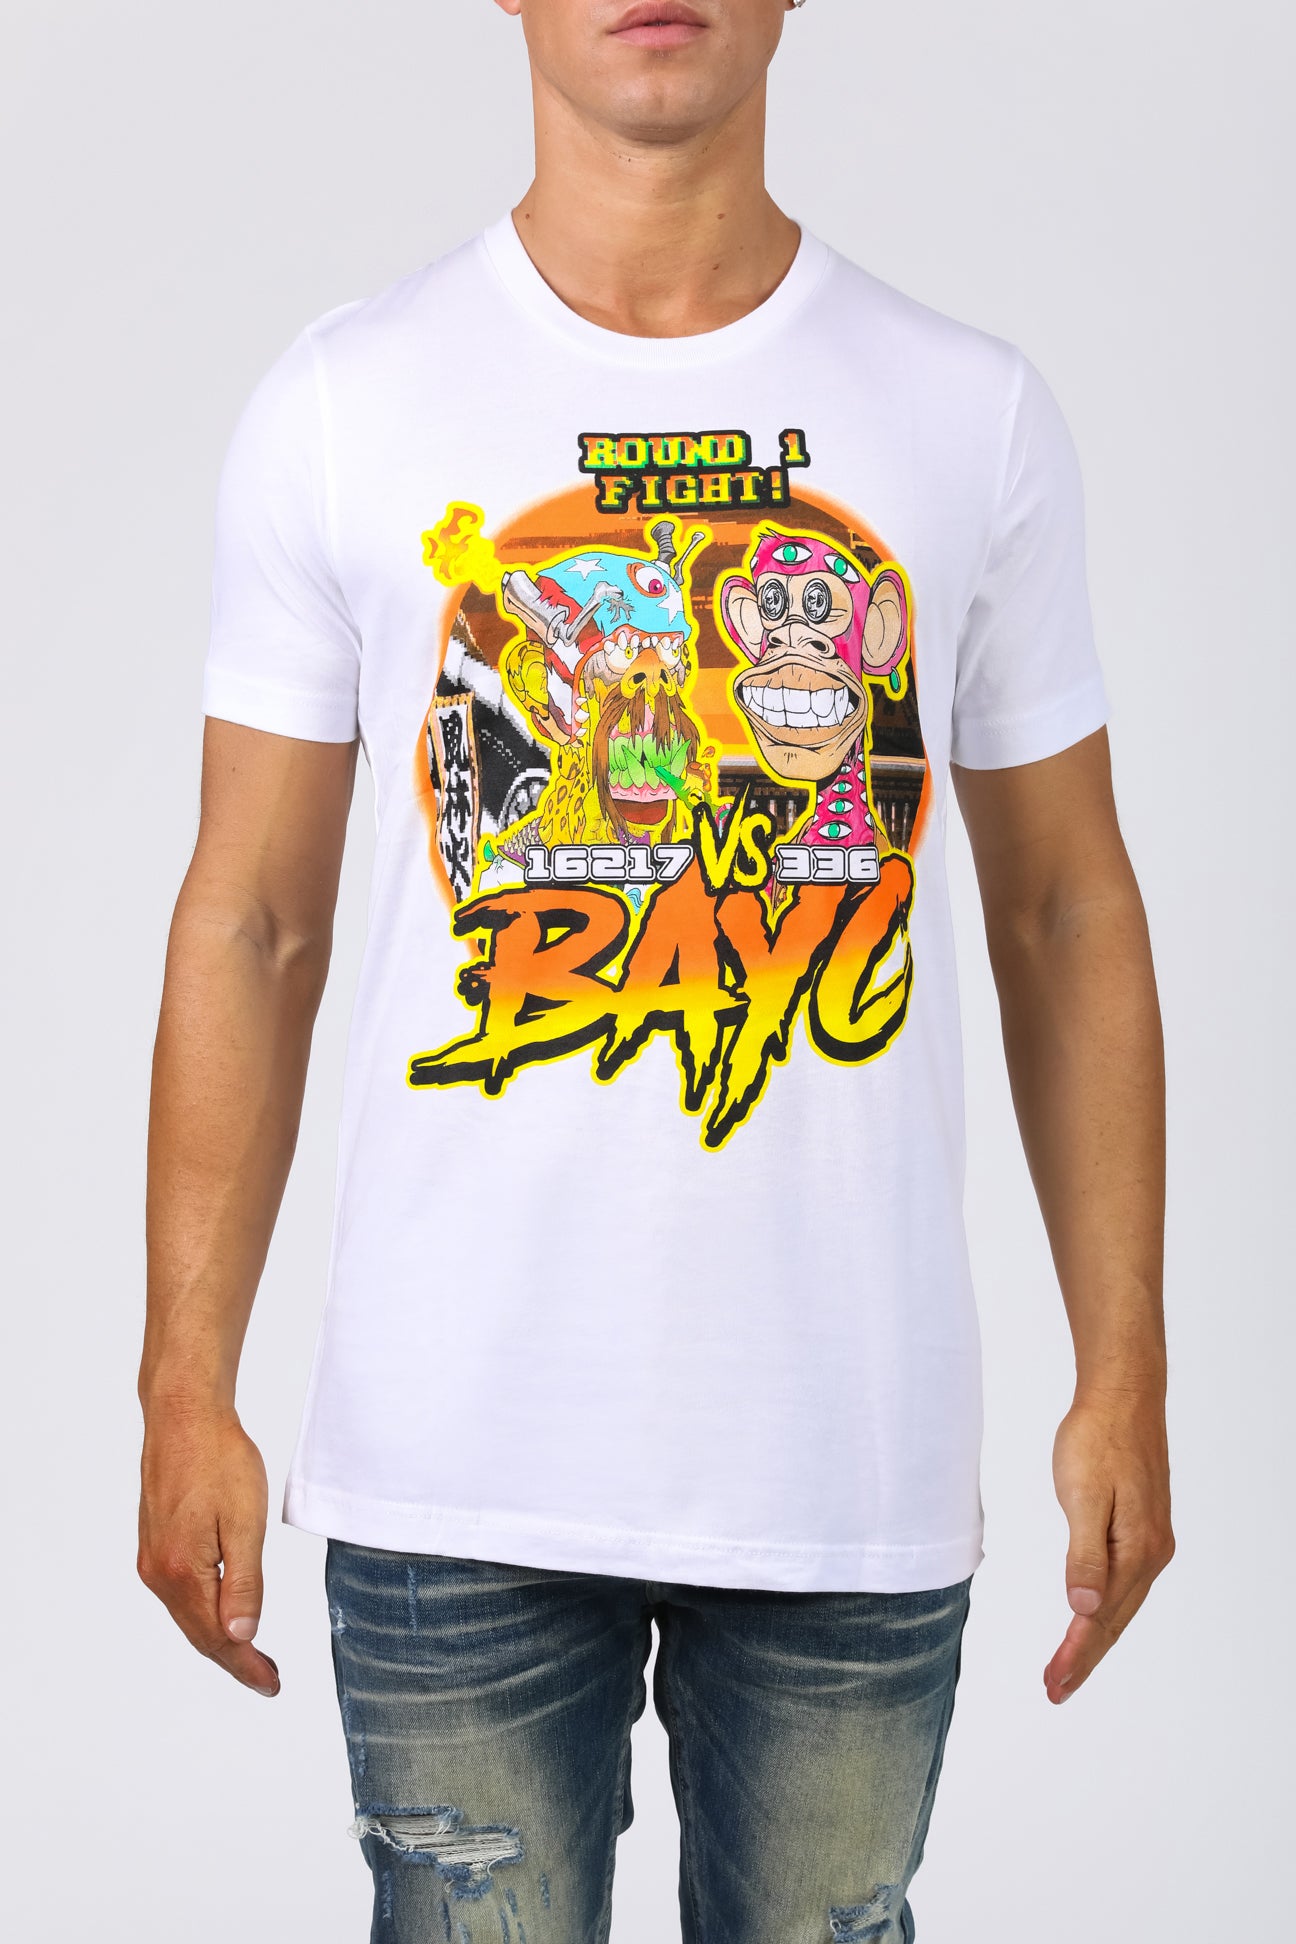 I'm An F'n Mutant Ape - OFFICIAL MAYC TEE